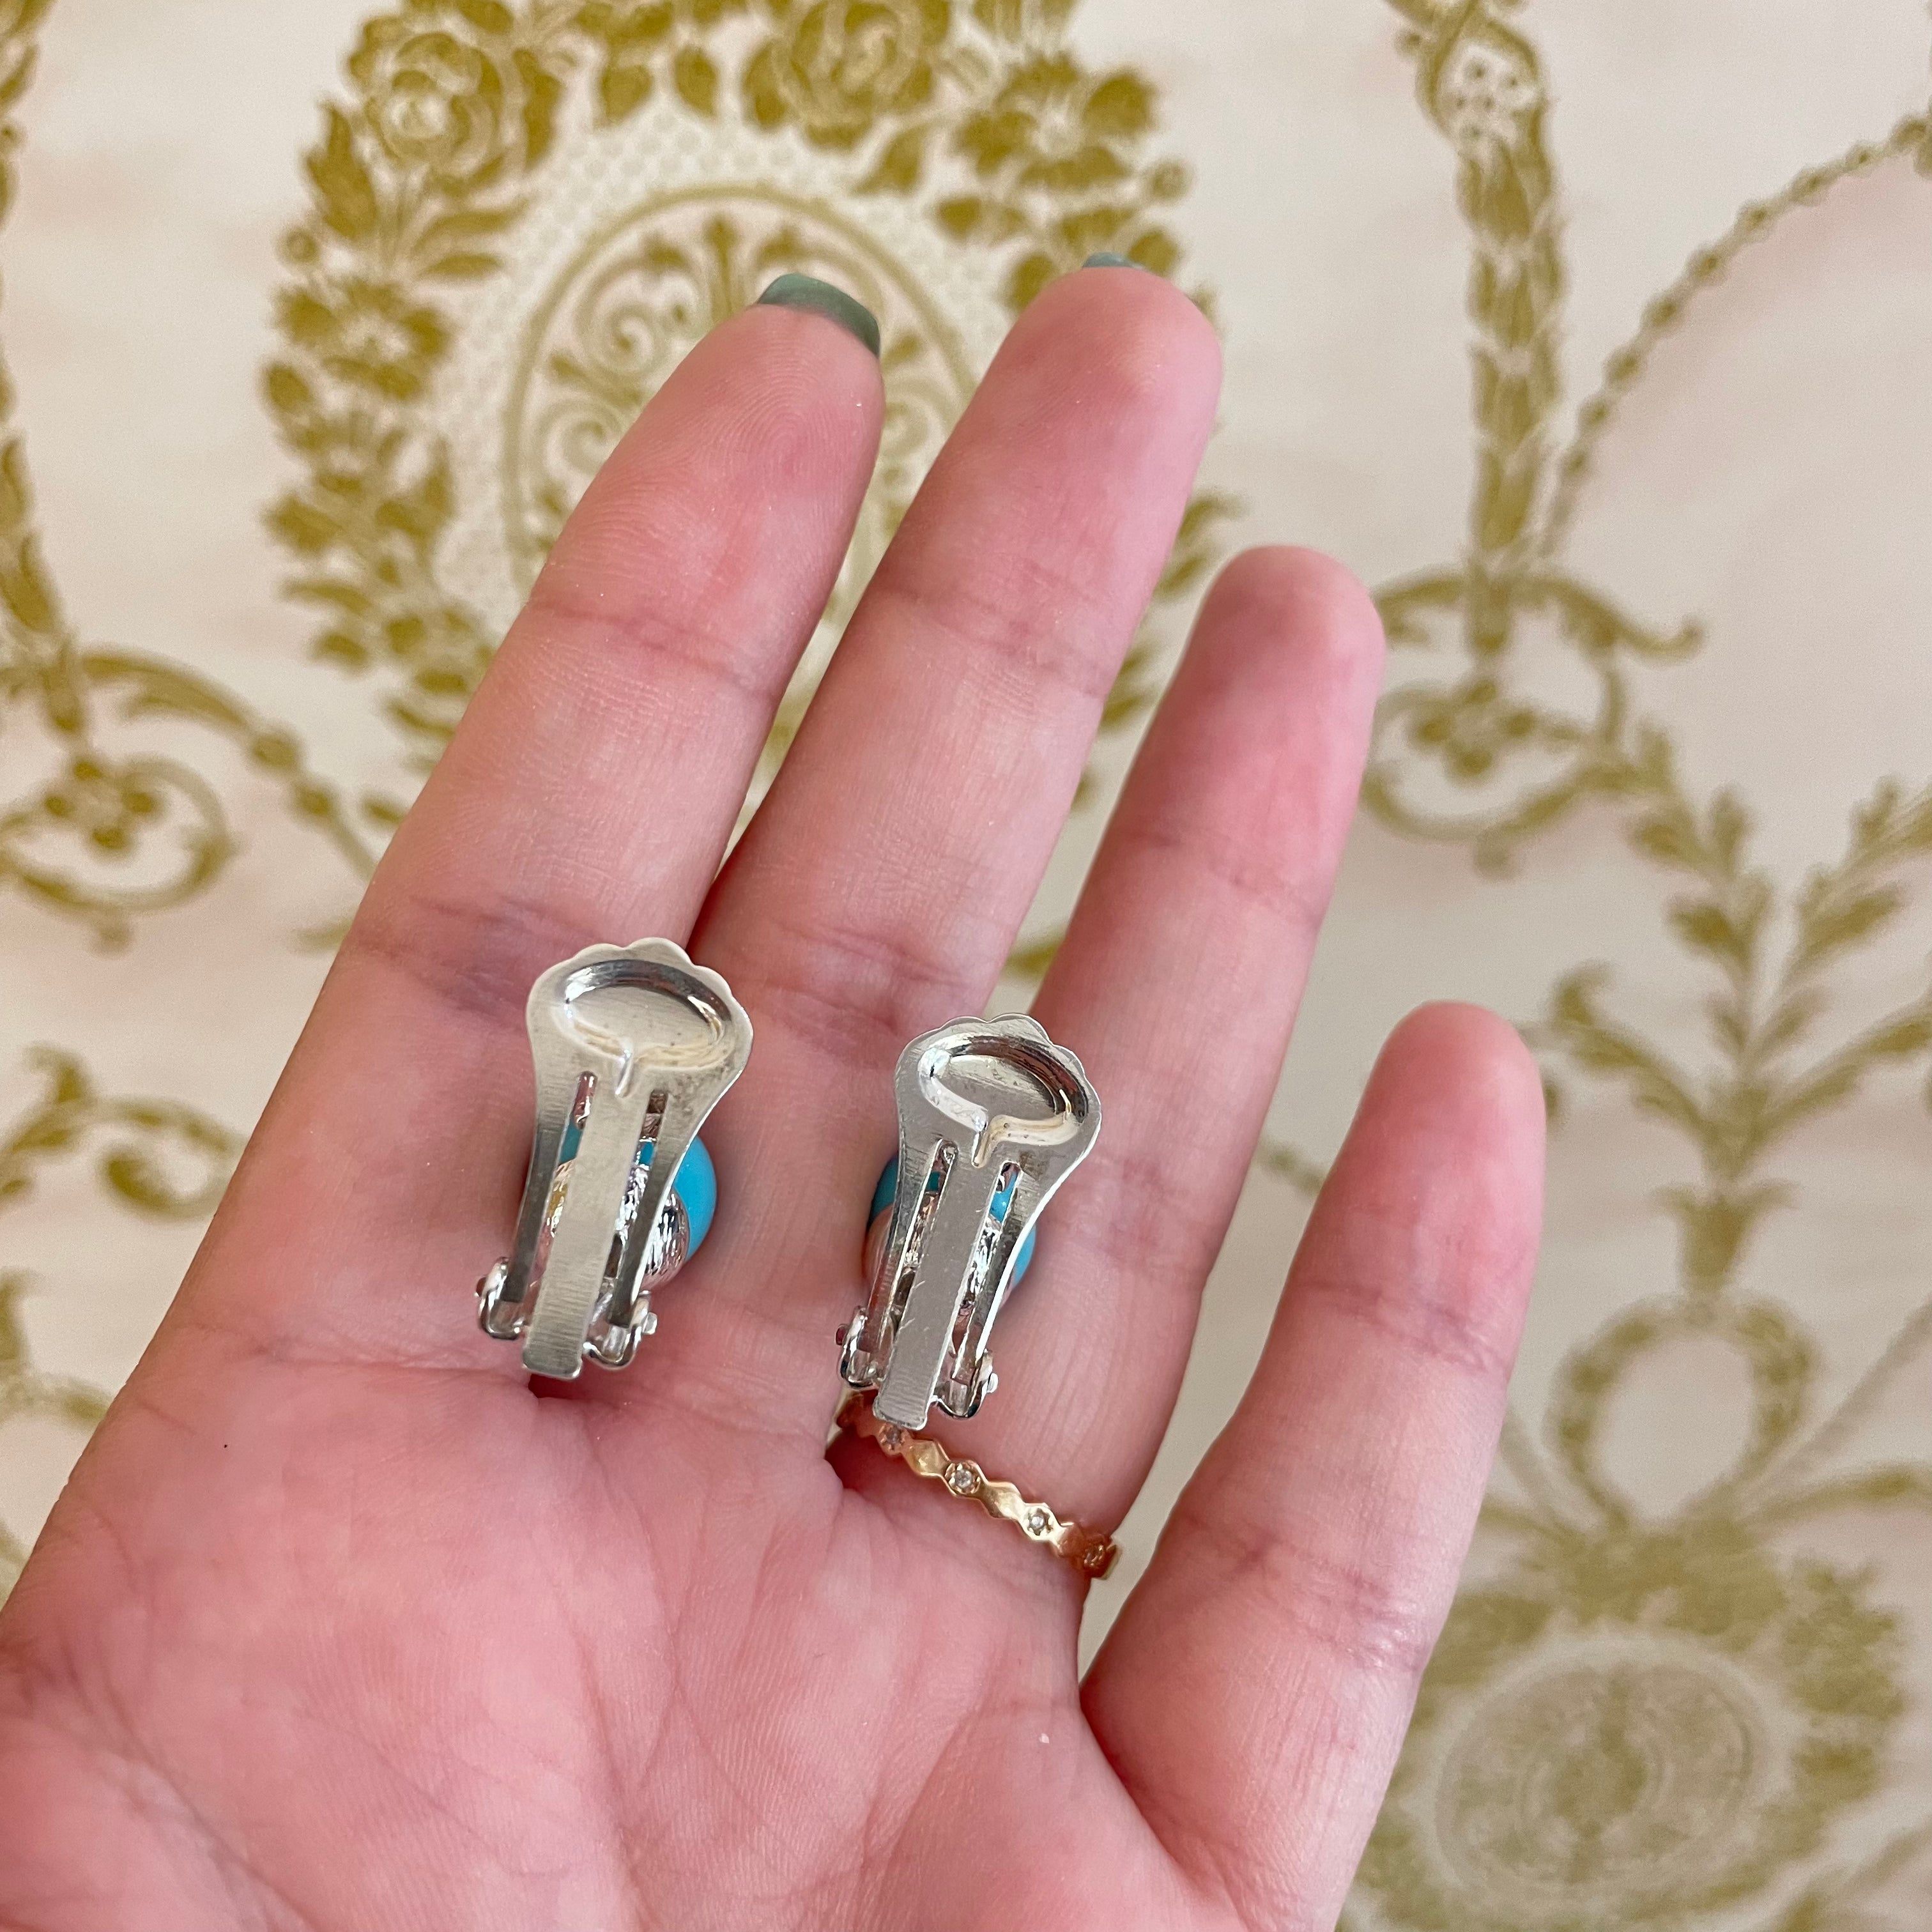 Turquoise C.Z Classic clips earrings